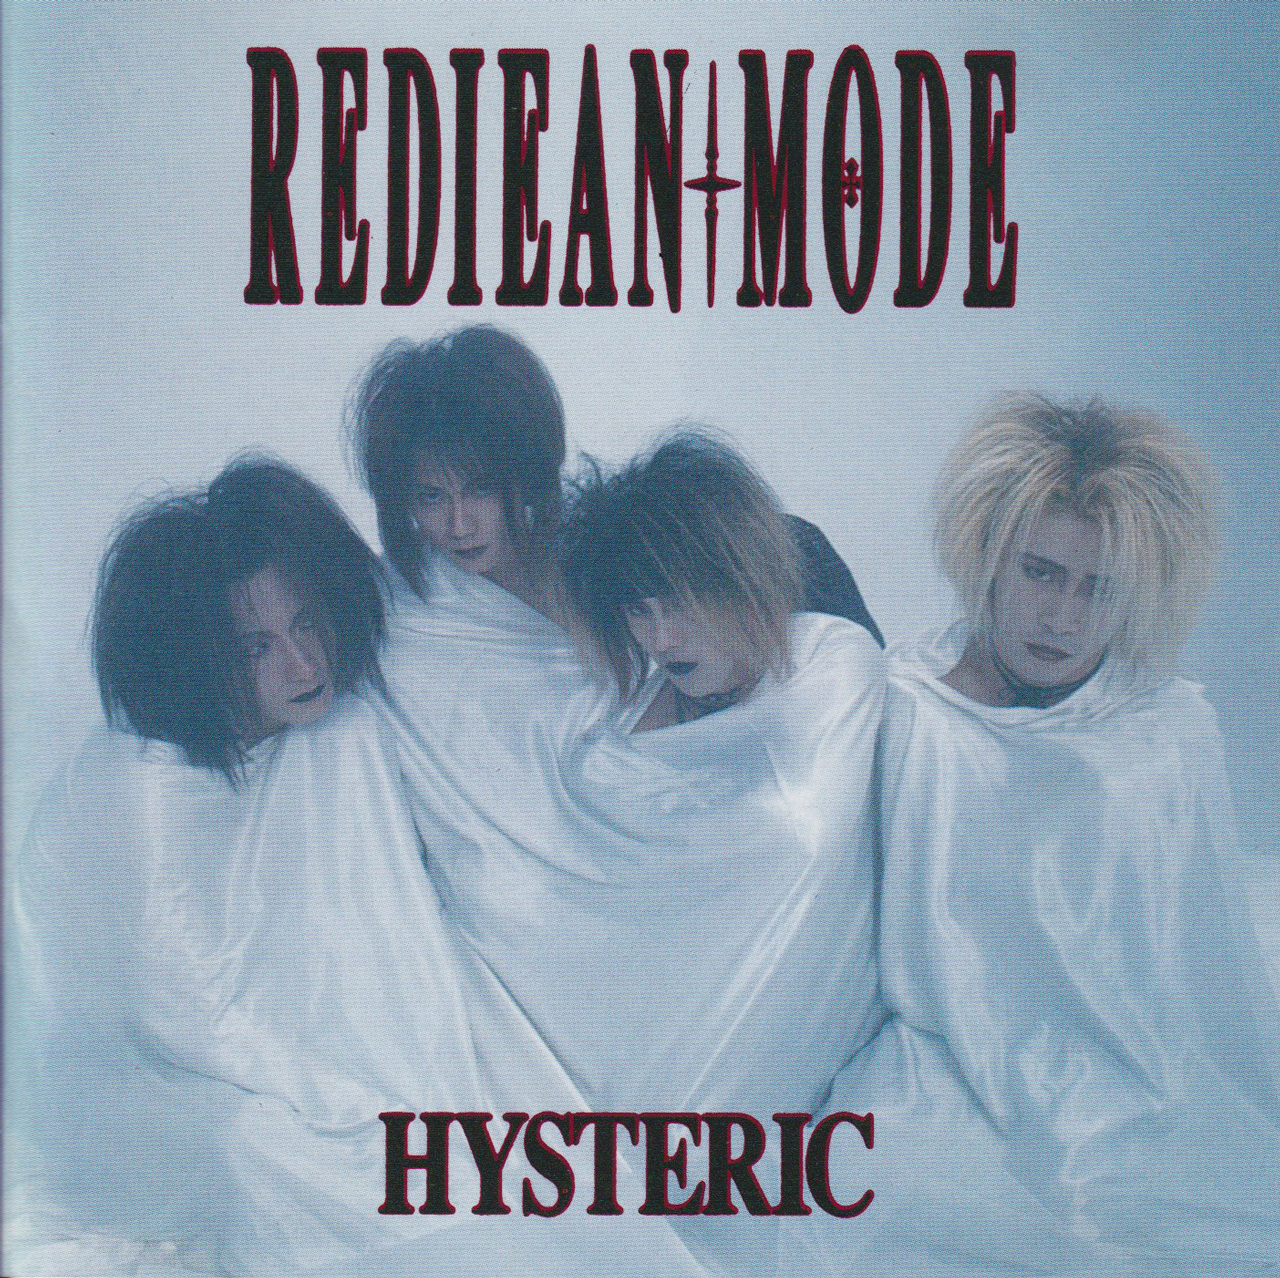 HYSTERIC / REDIEAN;MODE